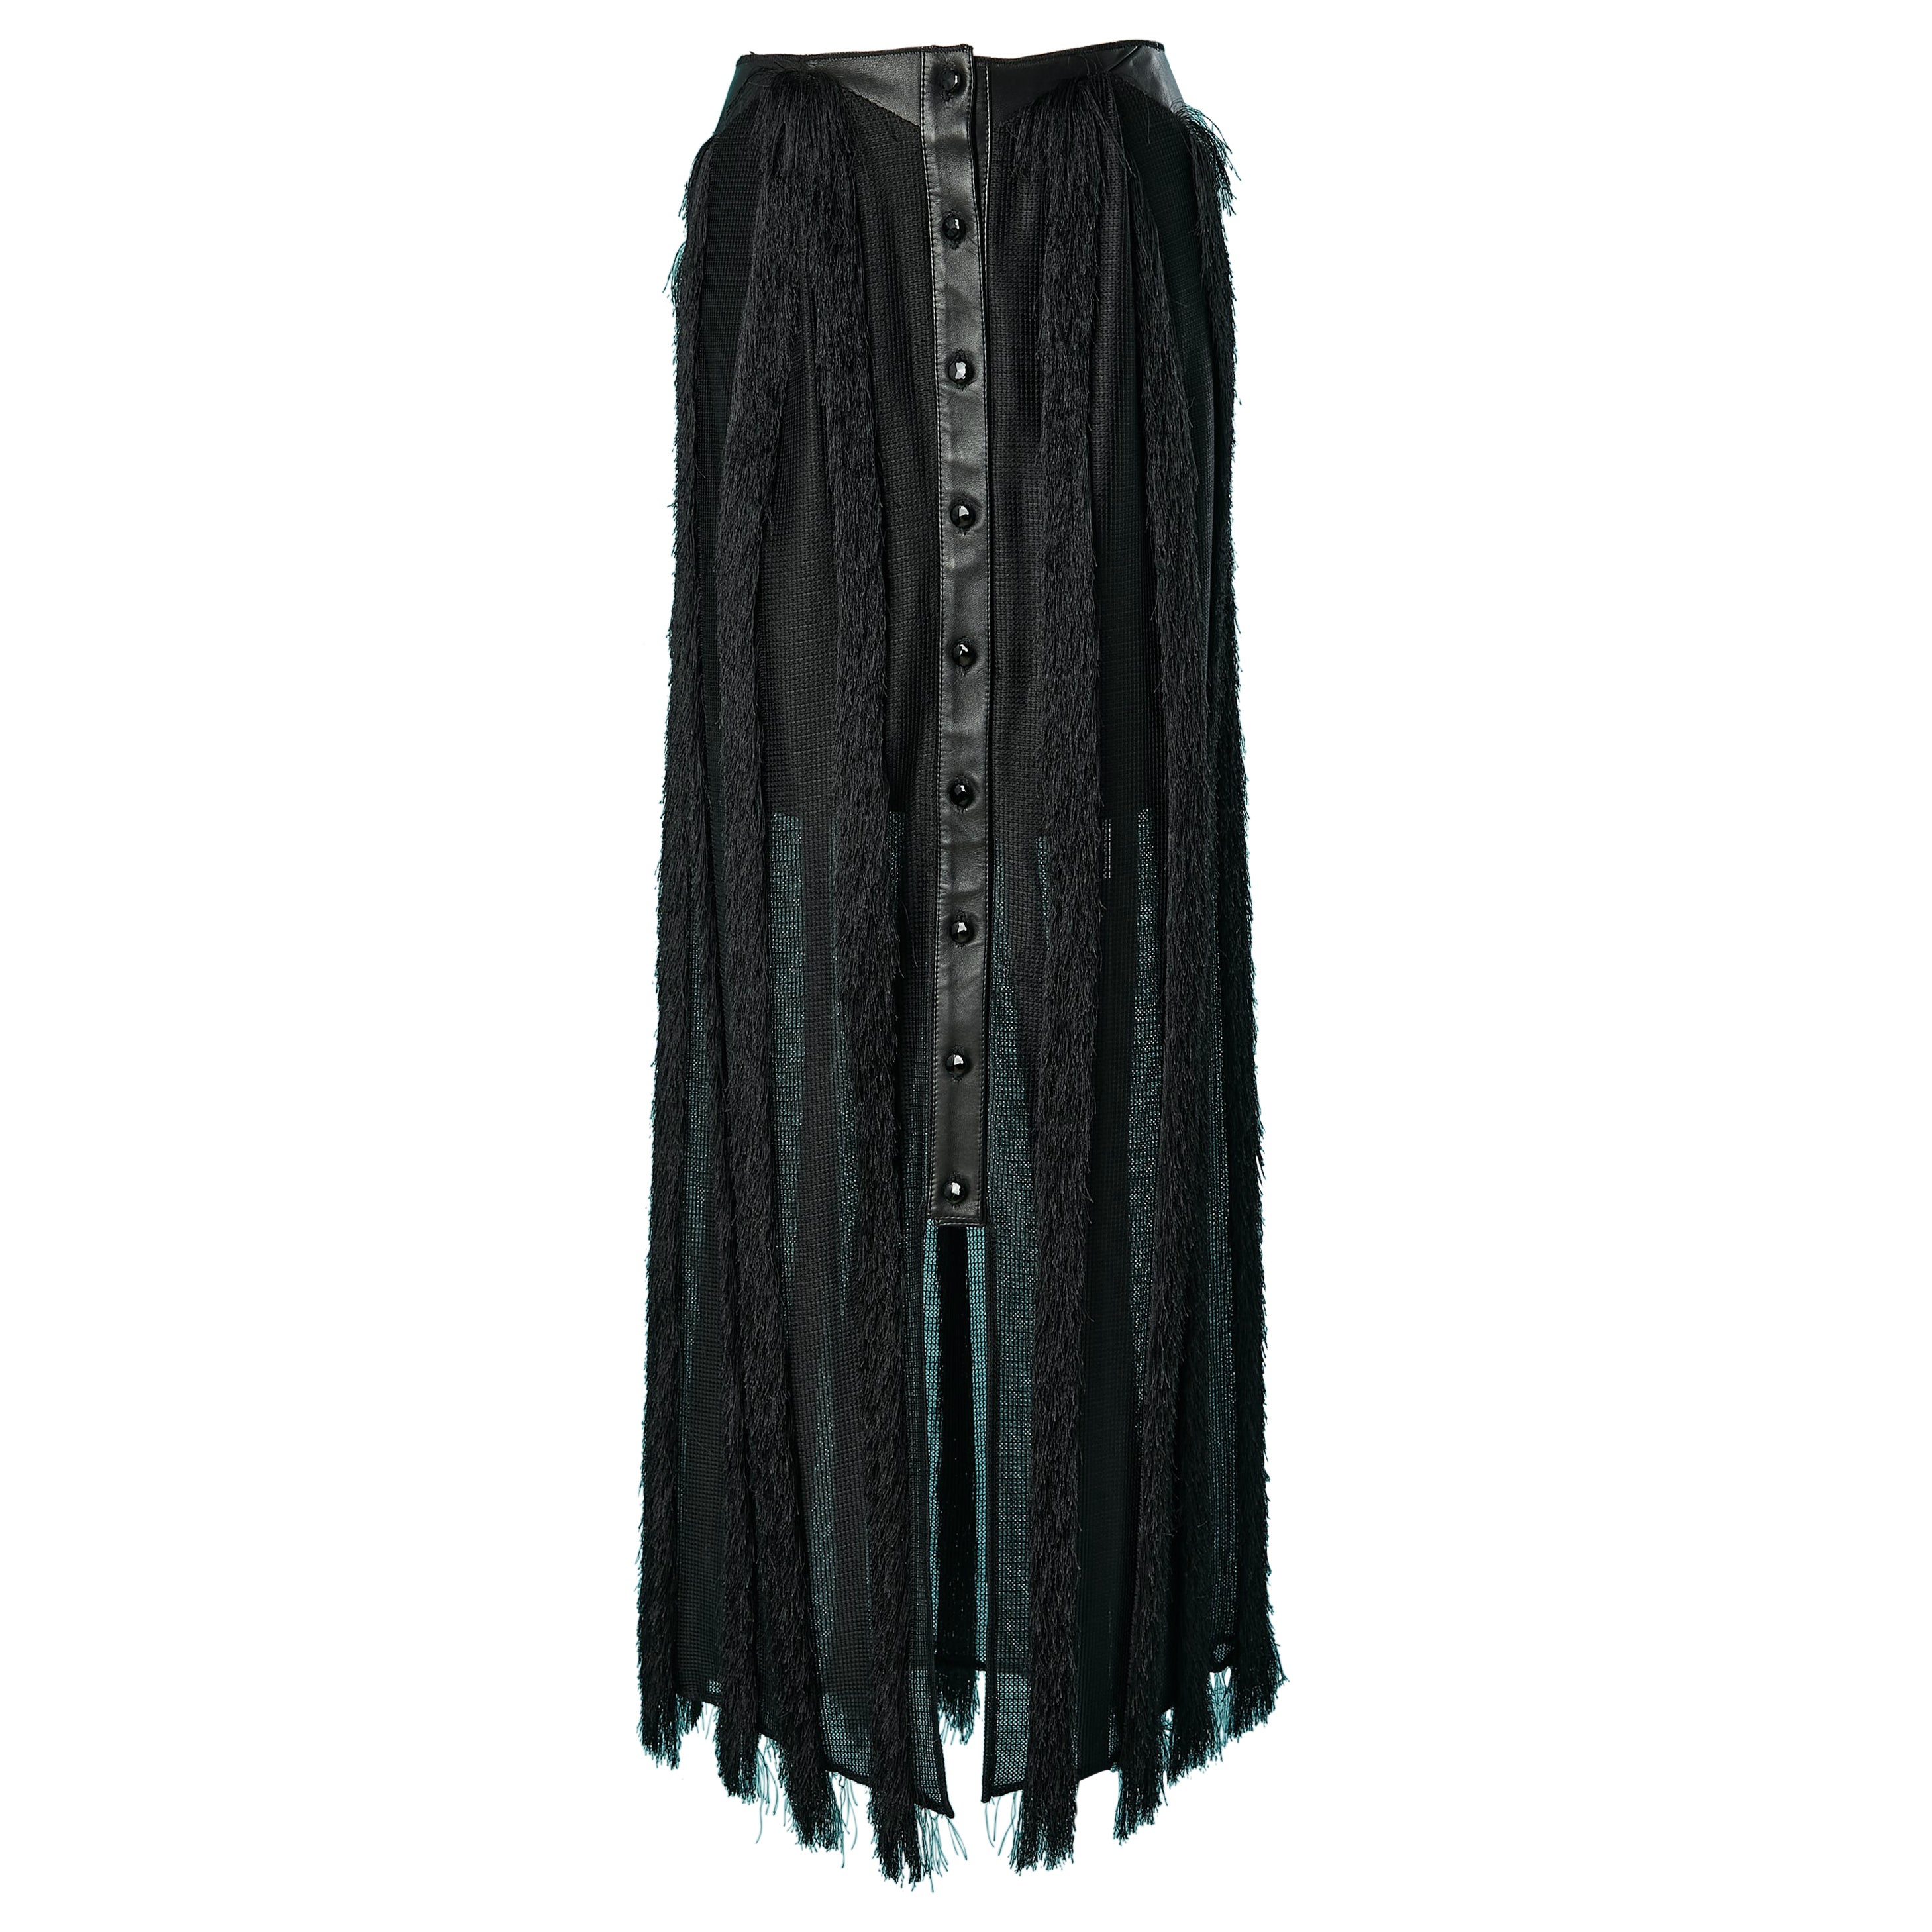 Black long skirt made of leather, soft tulle and threads fringes Augustin Teboul